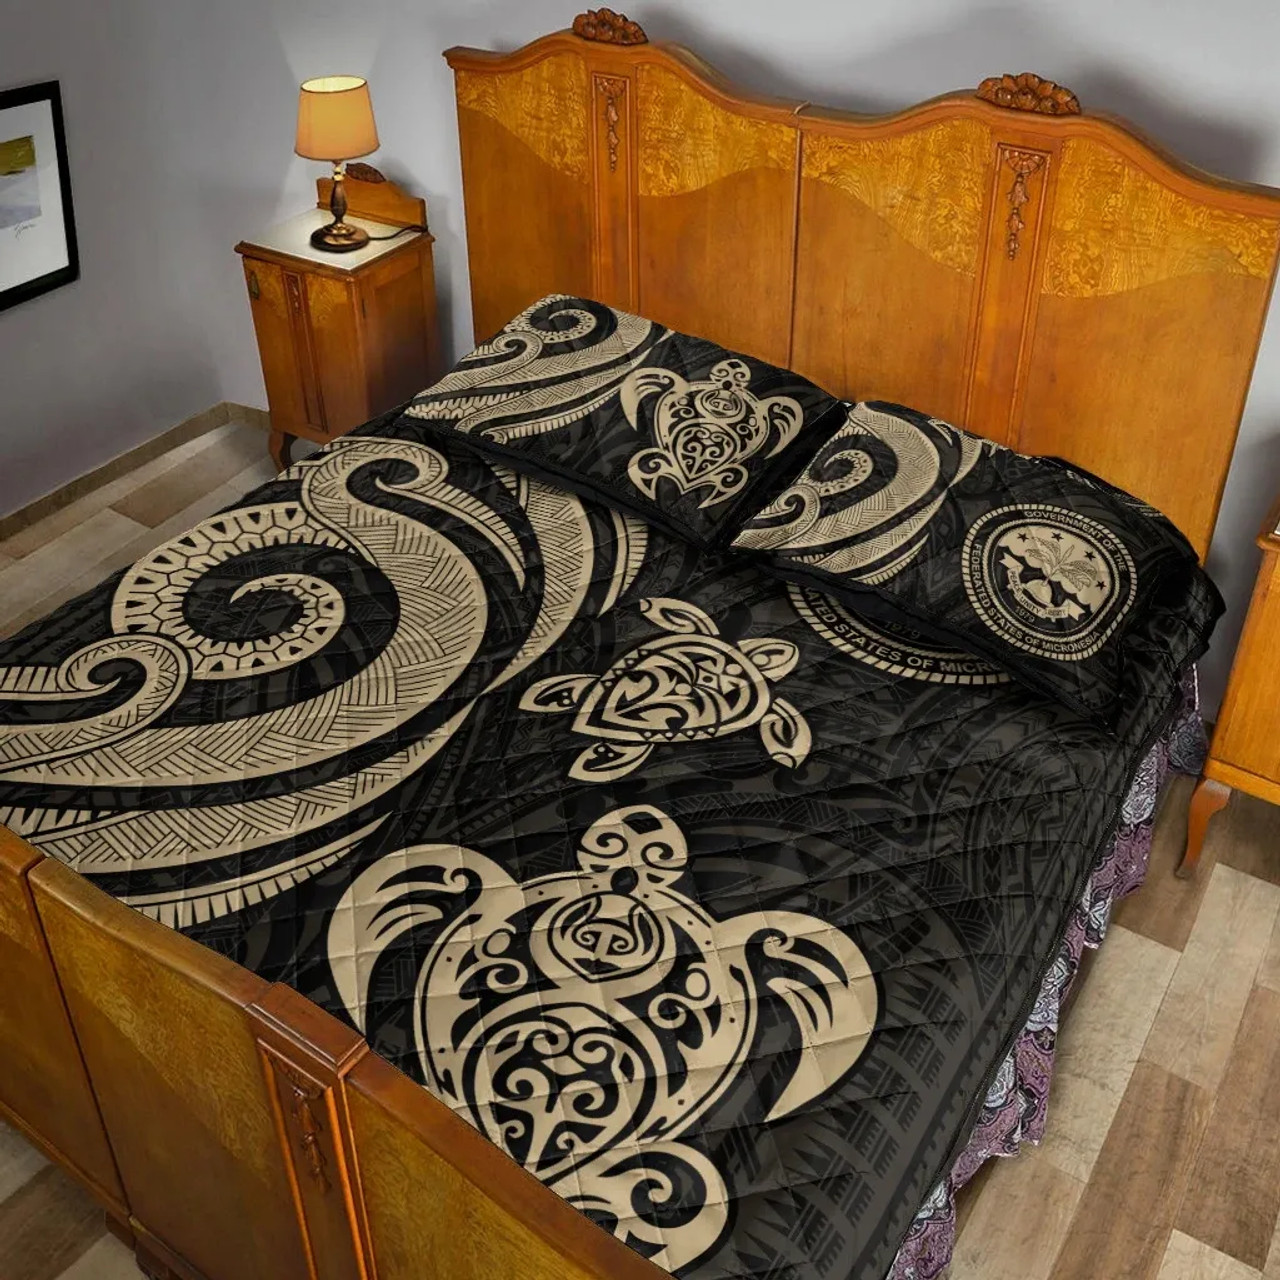 Federated States of Micronesia Quilt Bed Set - Gold Tentacle Turtle 2